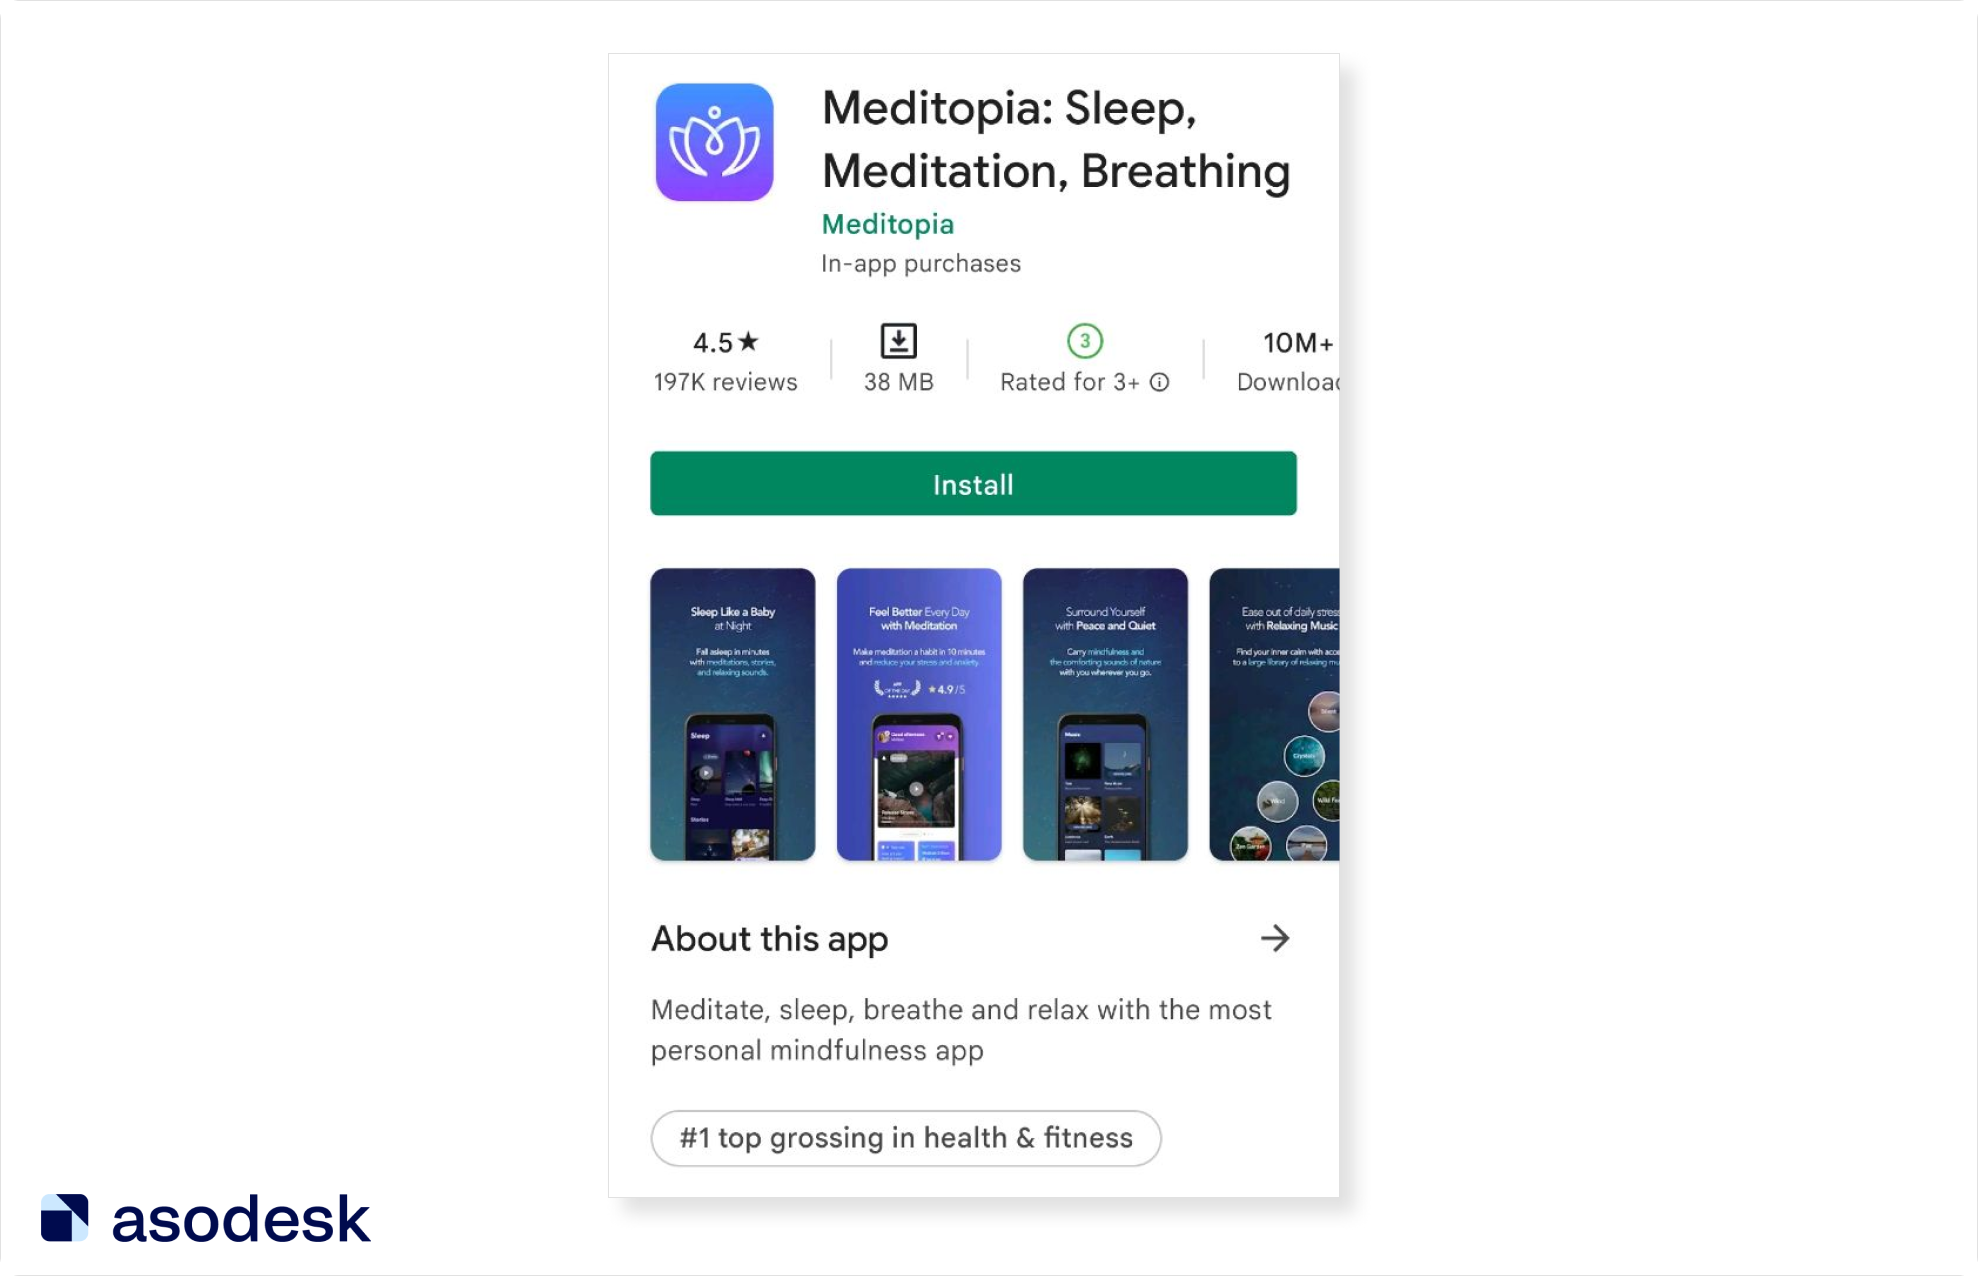 By the name of the Meditopia app, you can immediately understand the purpose of this app.